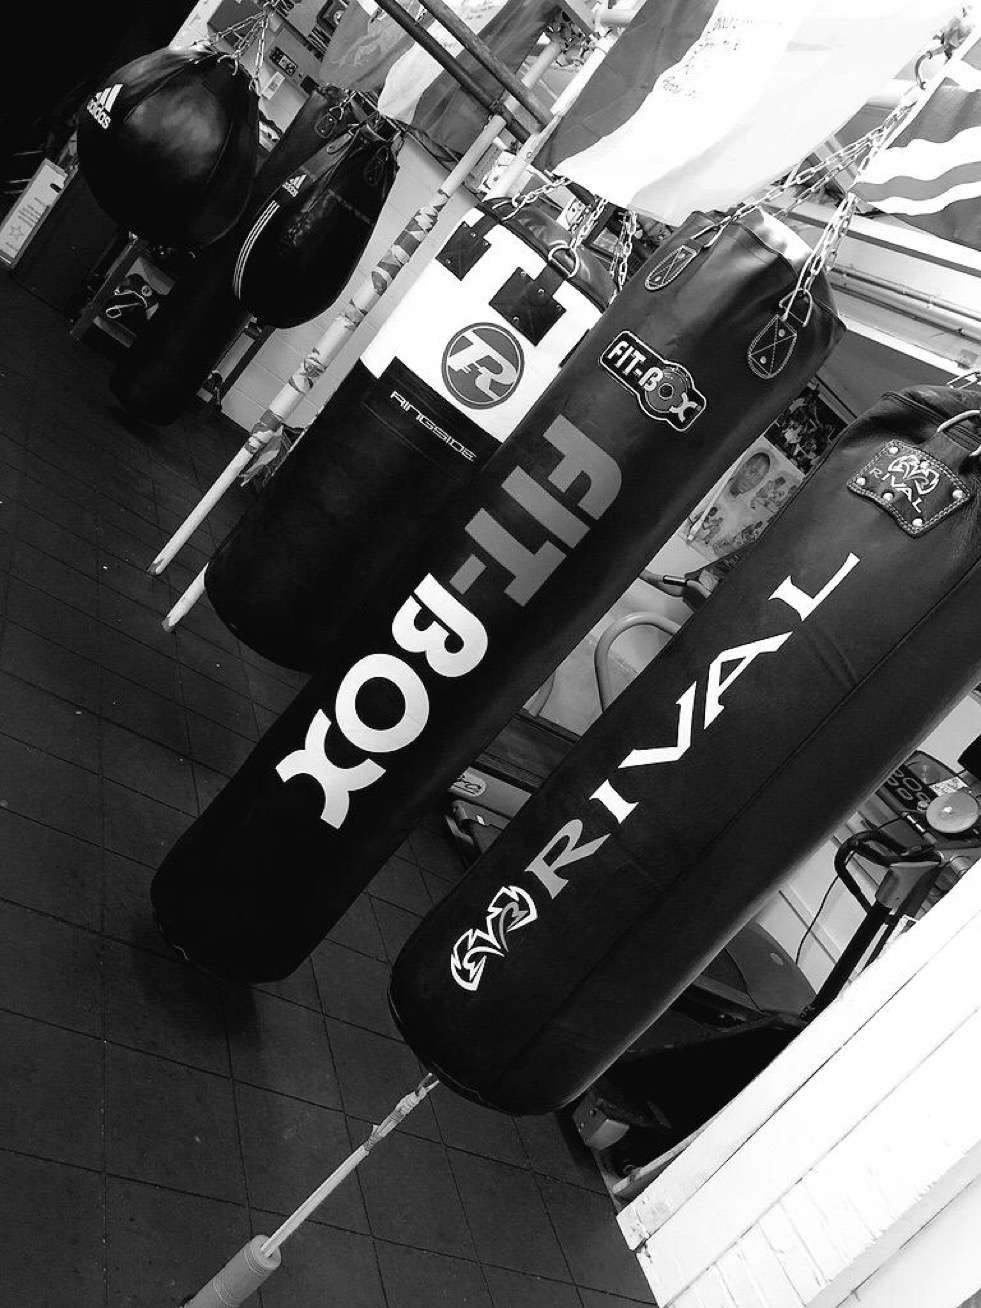 Brentwood Youth ABC | 11-12a, Hallsford Bridge Industrial Estate, Stondon Rd, Hook End, Brentwood CM5 9RB, UK | Phone: 07834 353496